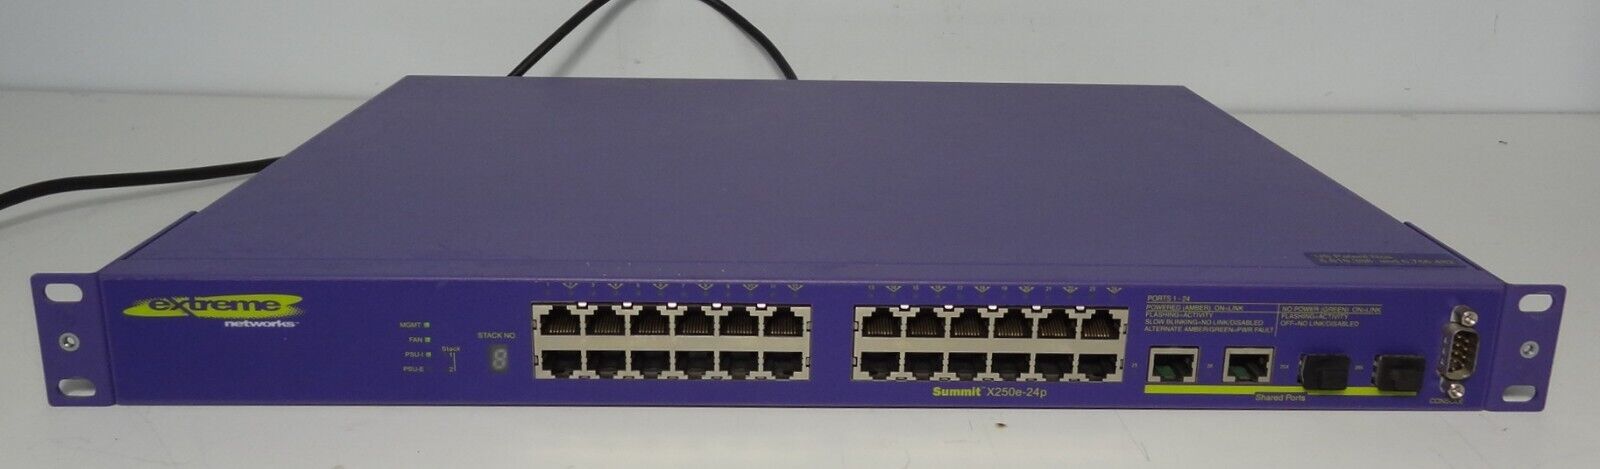 Extreme Networks Summit X250e-24p 24 Port PoE Switch - 15105